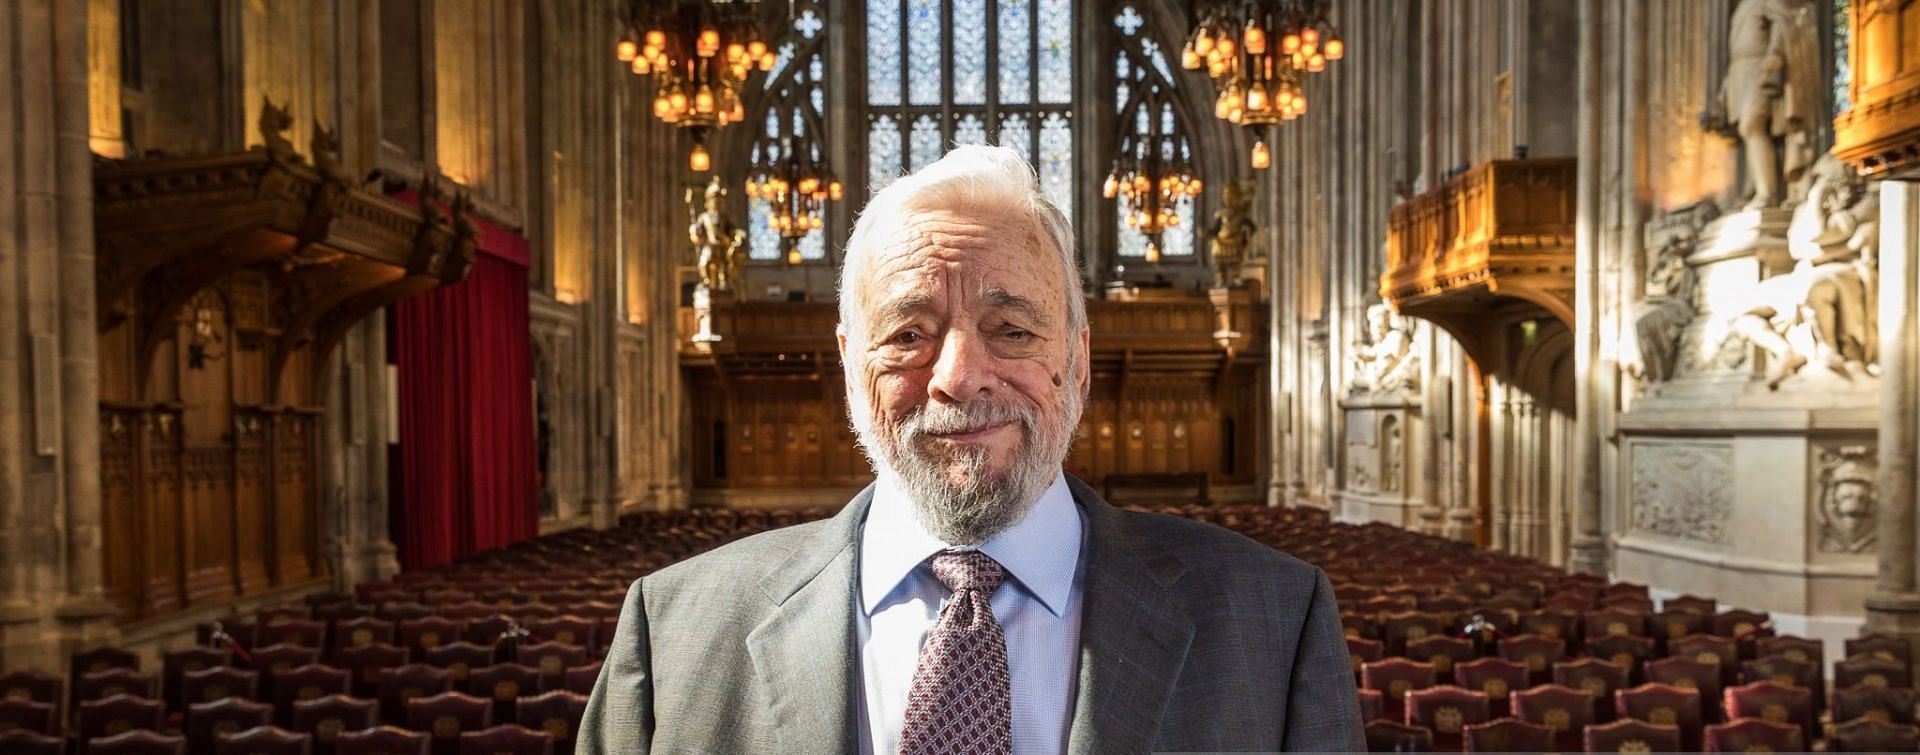 Broadway musical icon Stephen Sondheim met a &quot;sudden demise&quot; on November 26, 2021 (Image via Getty Images/Tim P. Whitby)